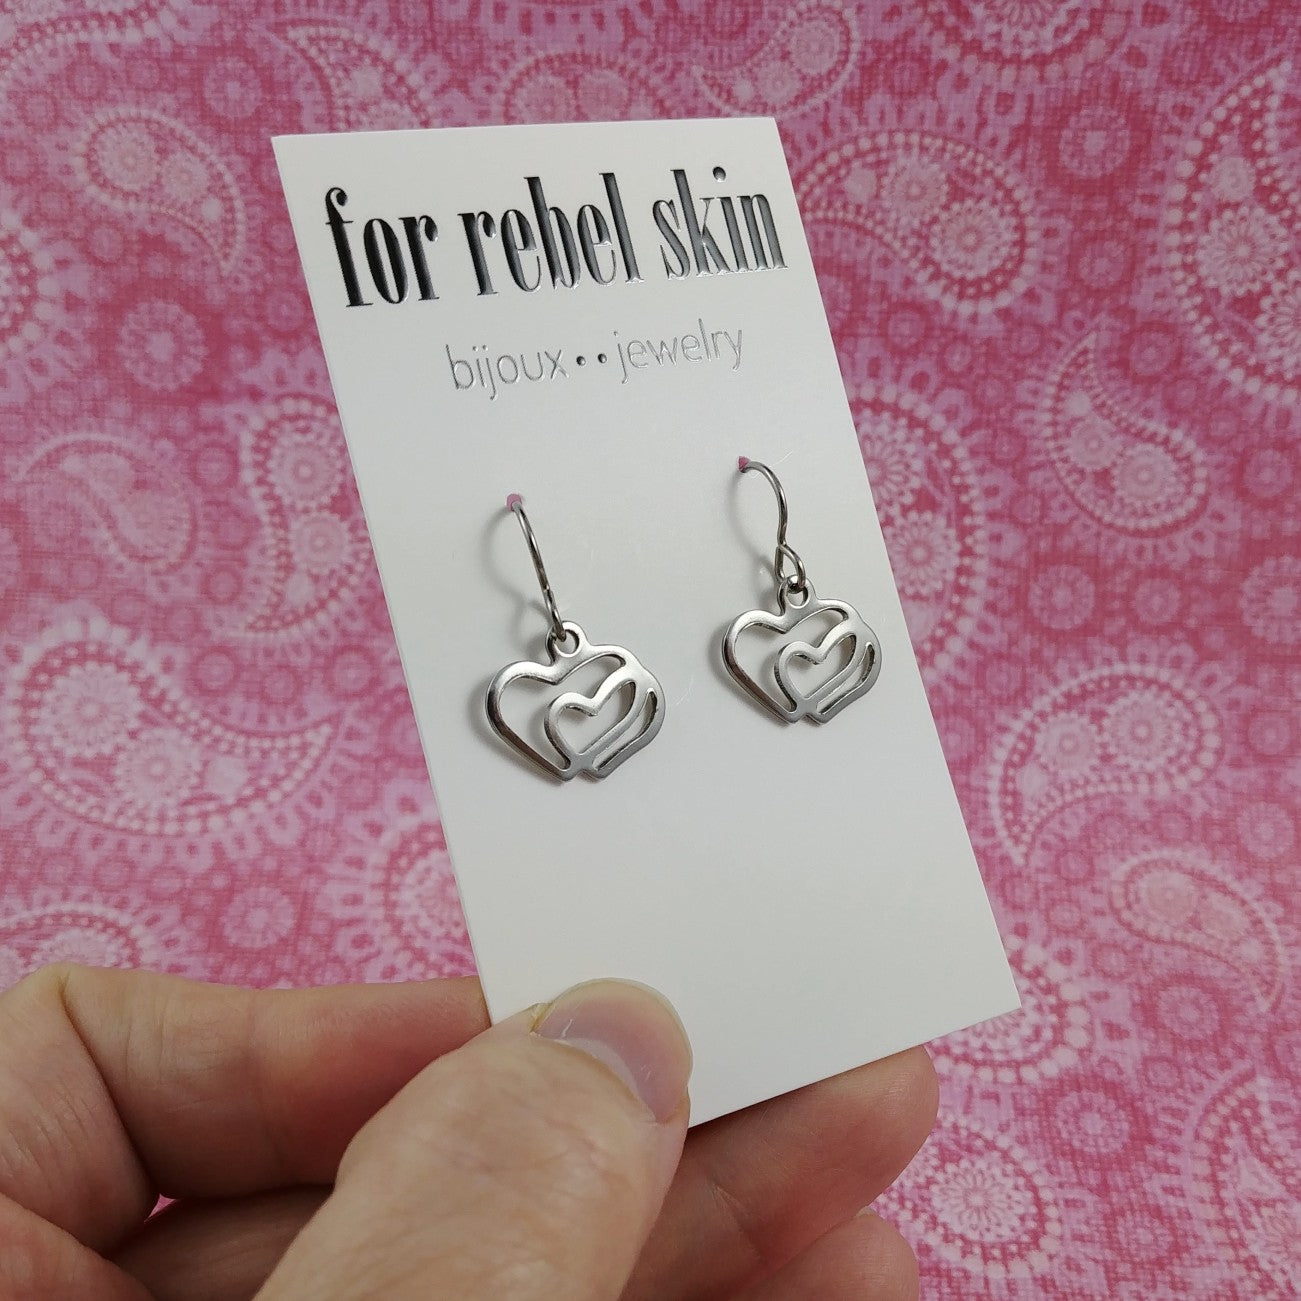 Silver heart dangle earrings - Hypoallergenic pure titanium and stainless steel